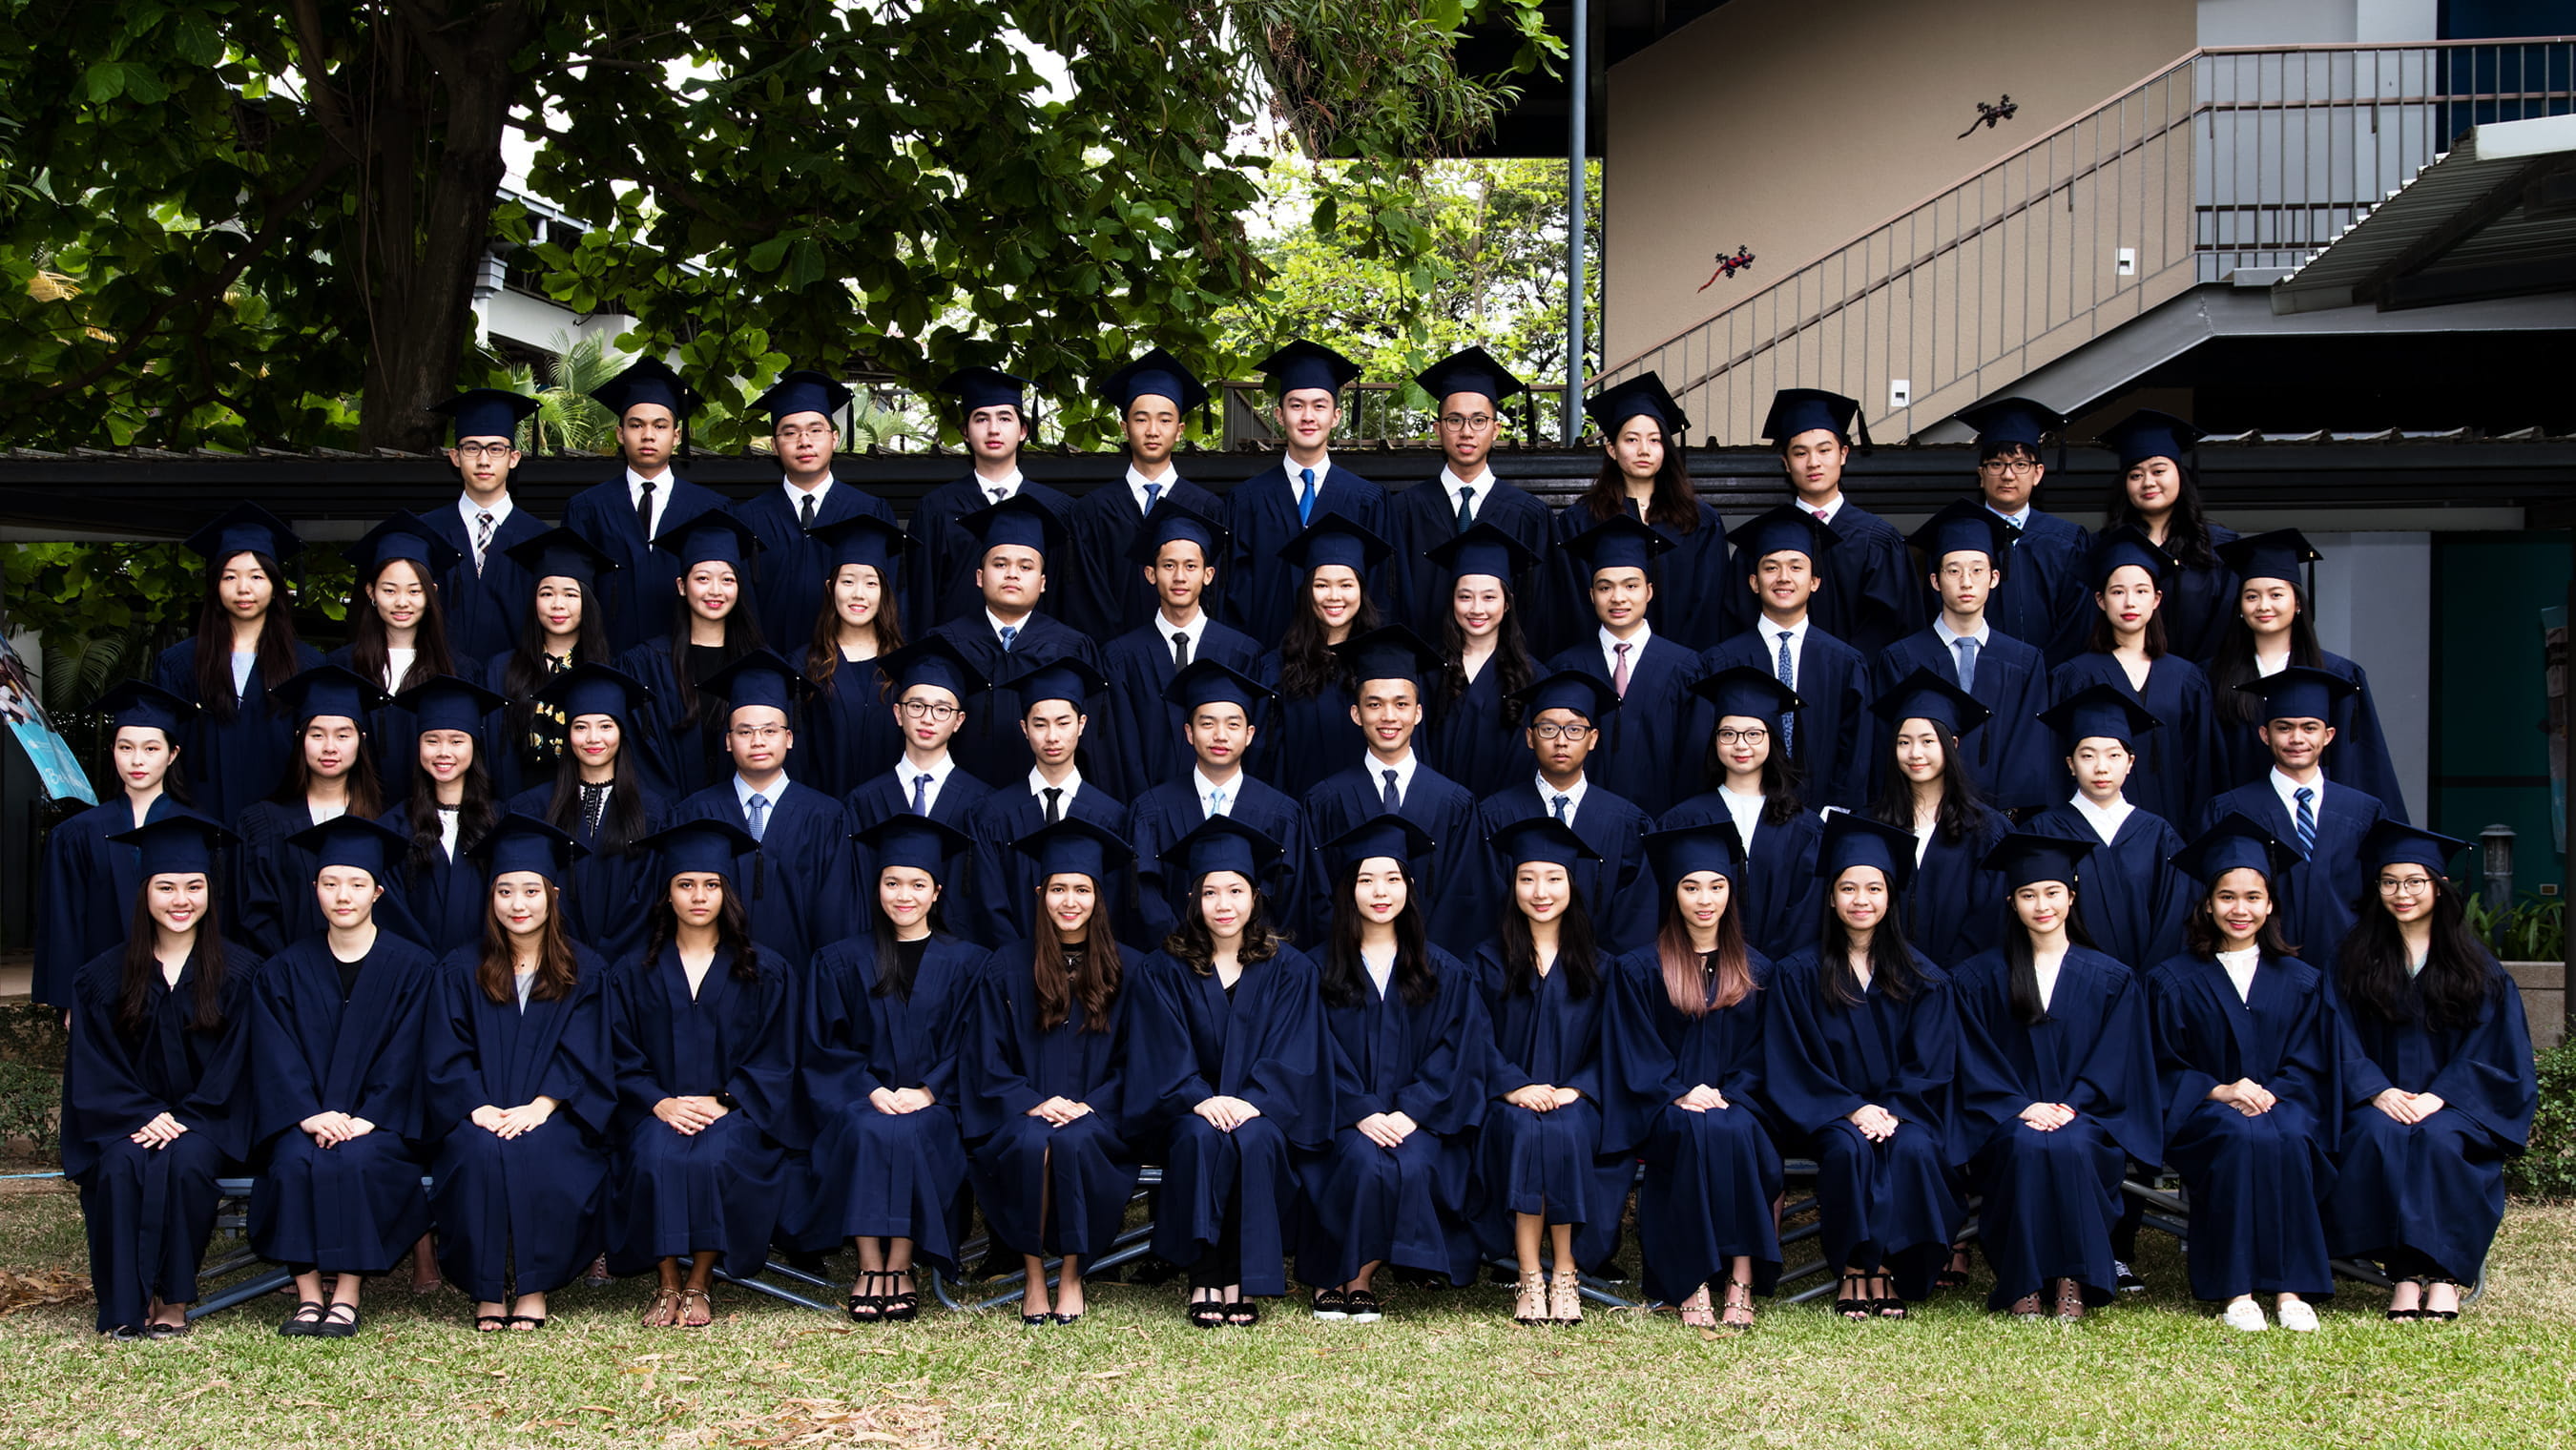 Outstanding IB Diploma results achieved by Northbridge students for 2018/19 academic year - outstanding-ib-diploma-results-achieved-by-northbridge-students-for-201819-academic-year